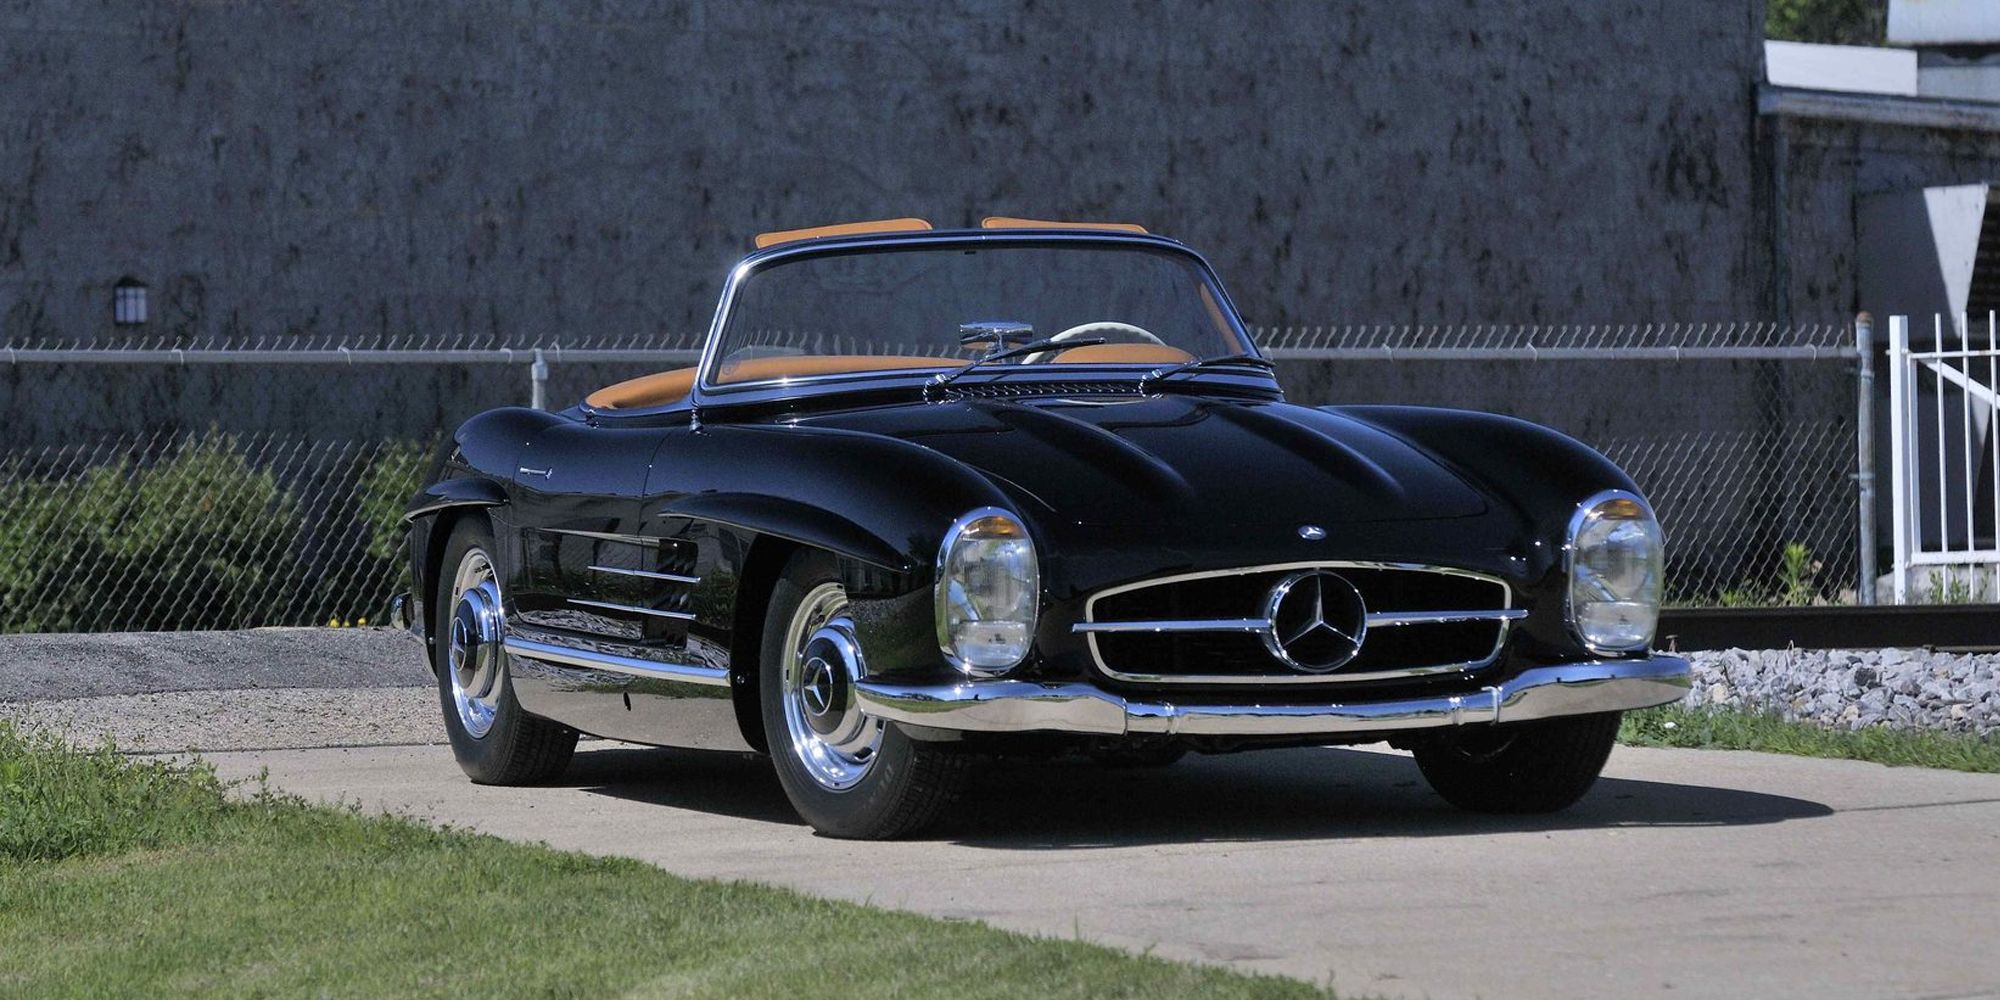 The front of a black 300SL Convertible